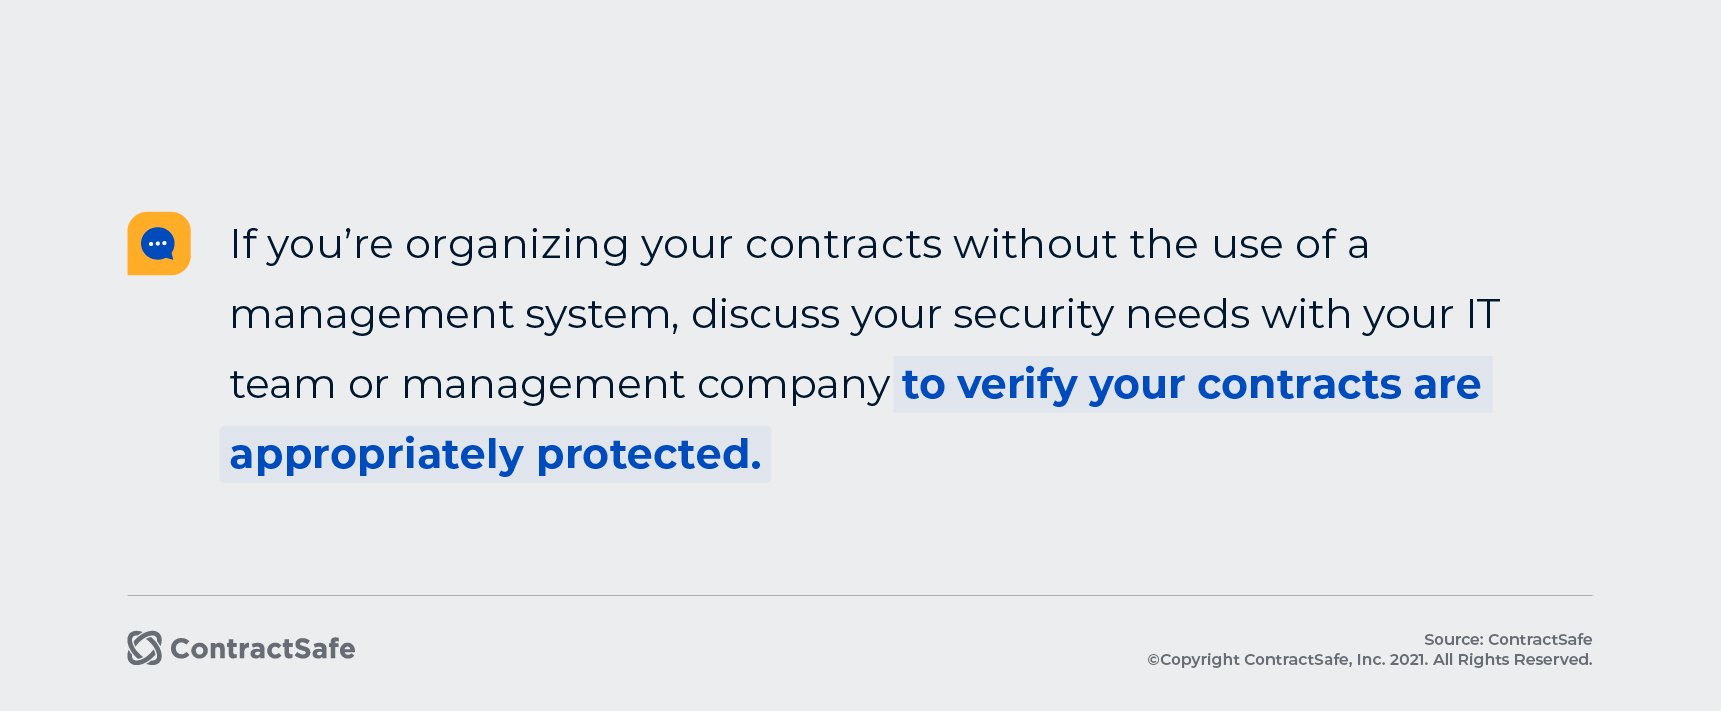 If you're organizing your contracts without the use of a management system, discuss your security needs with your IT team or management company to verify your contracts are appropriately protected. 